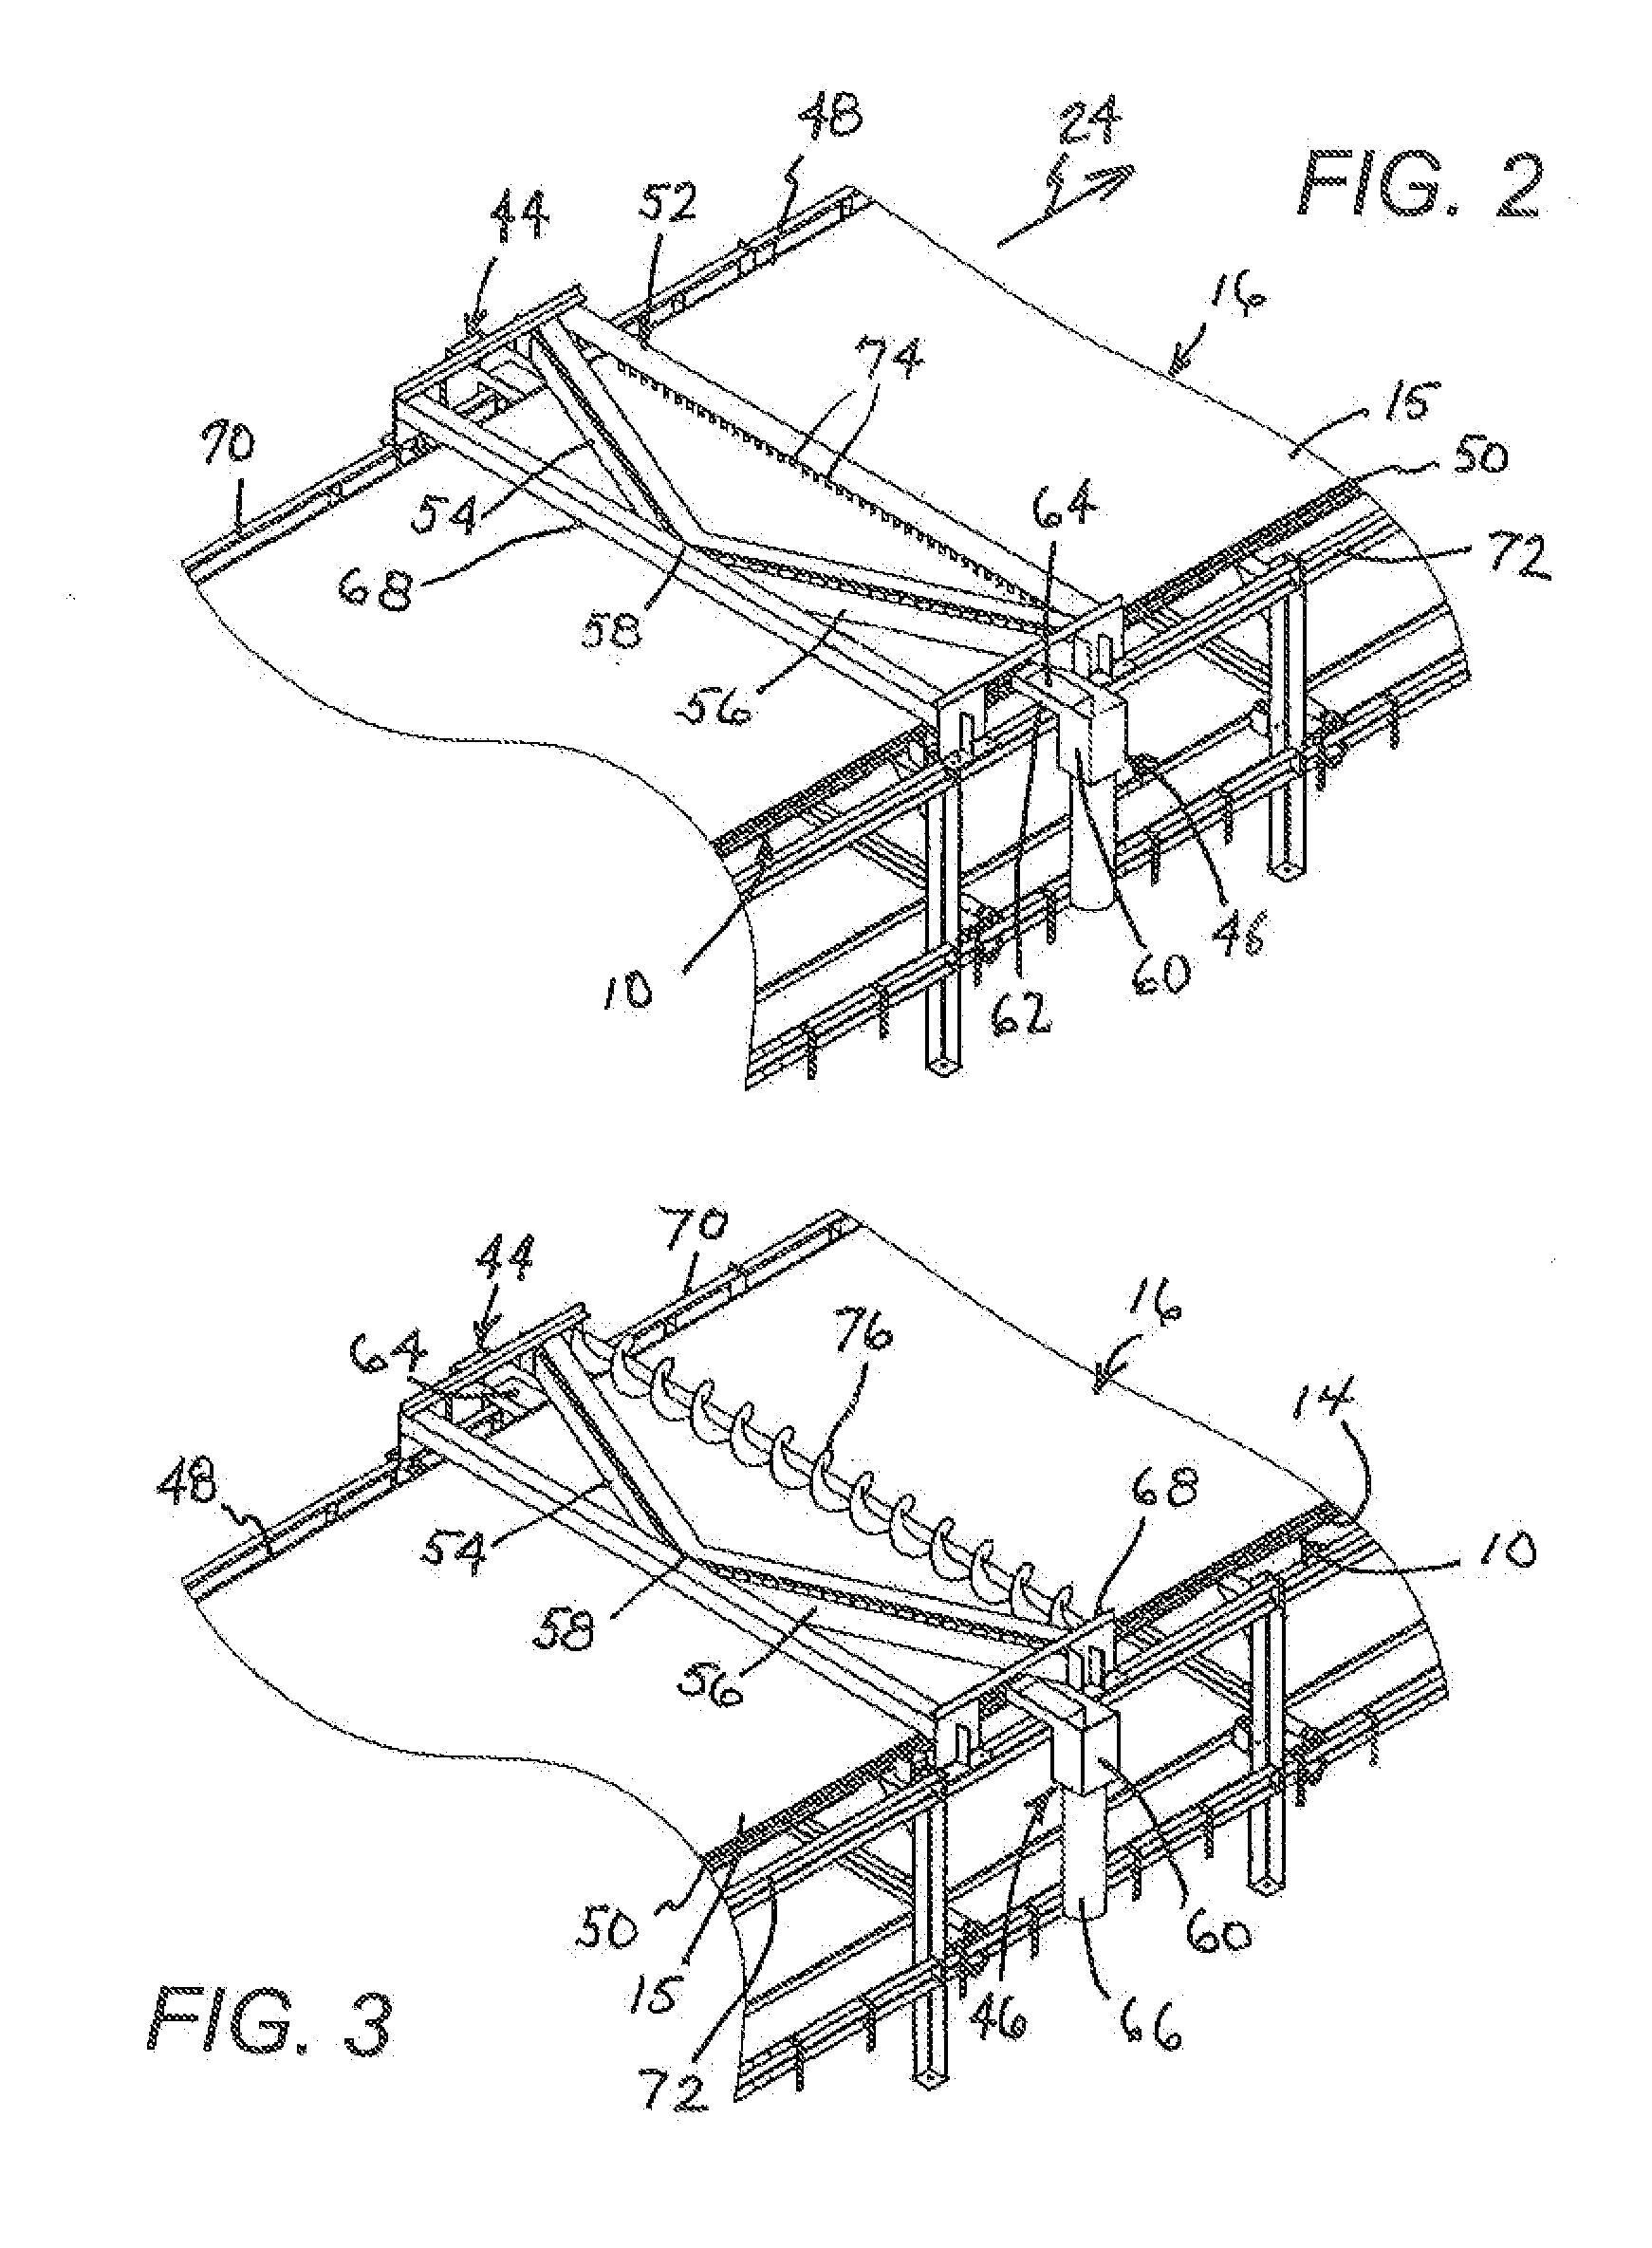 Horizontal belt vacuum filter with overhead fluid removal